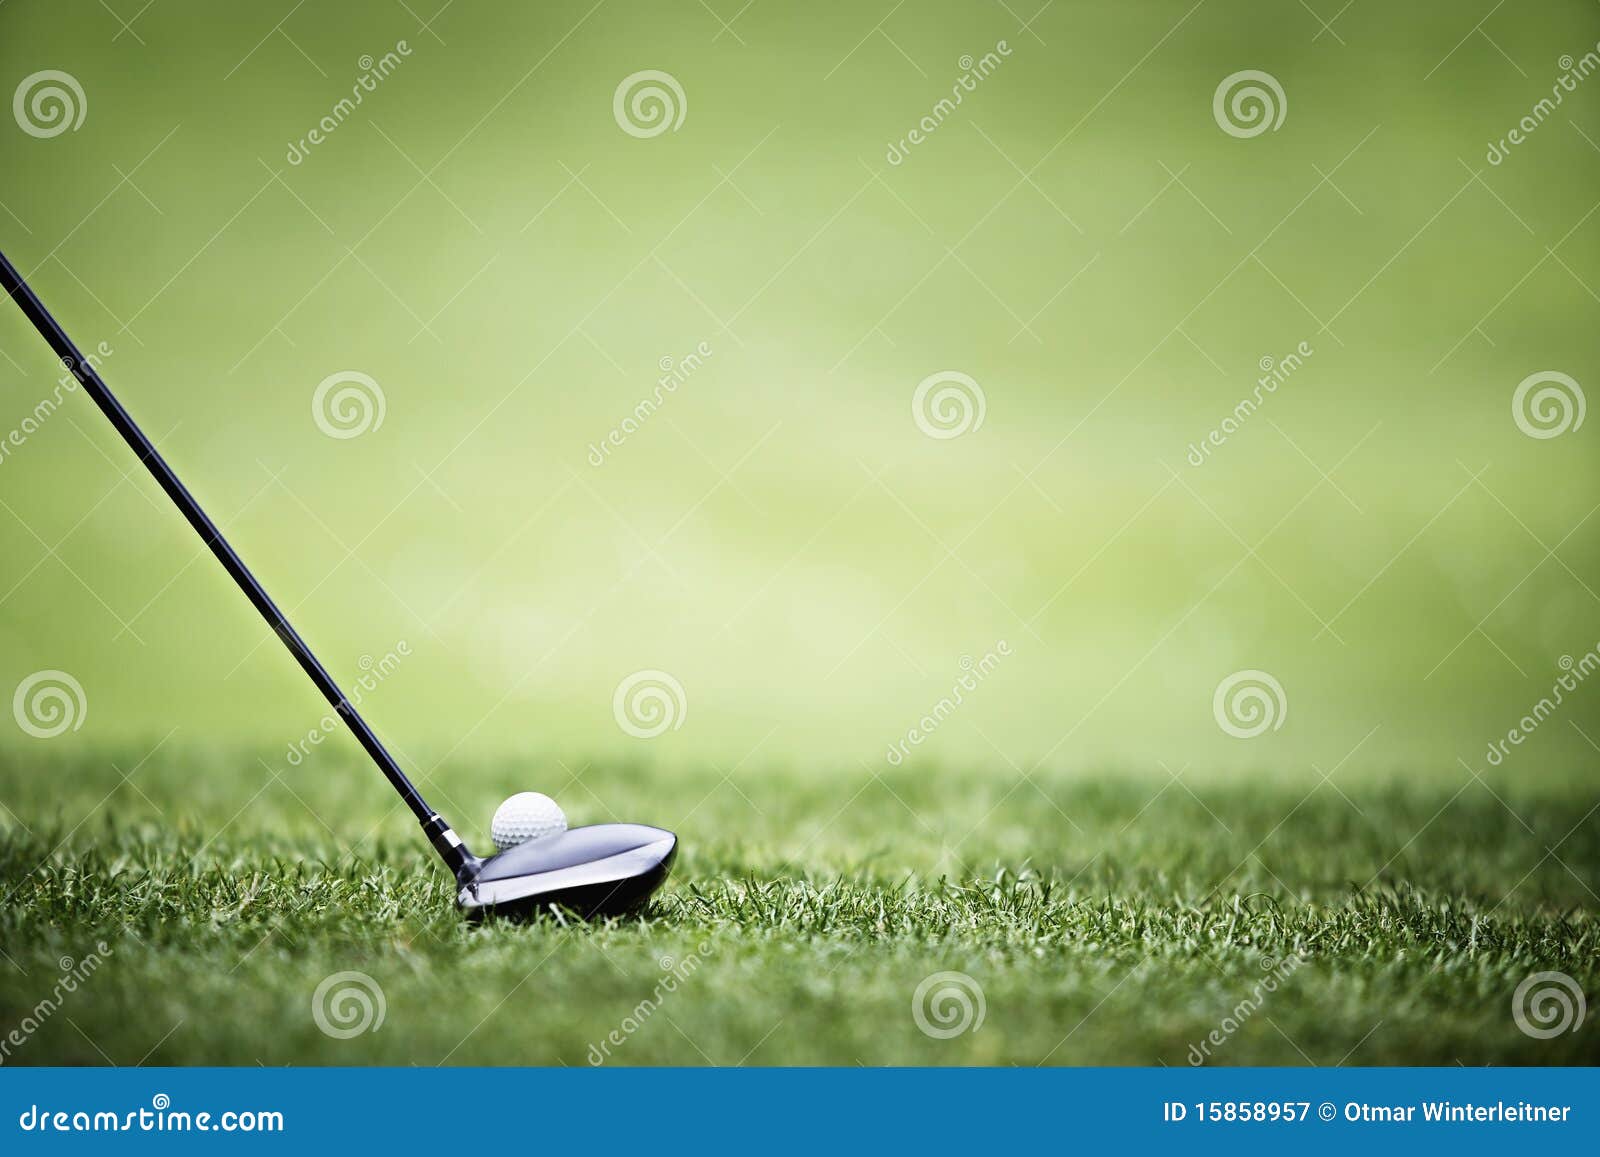 golf background with driver and ball.